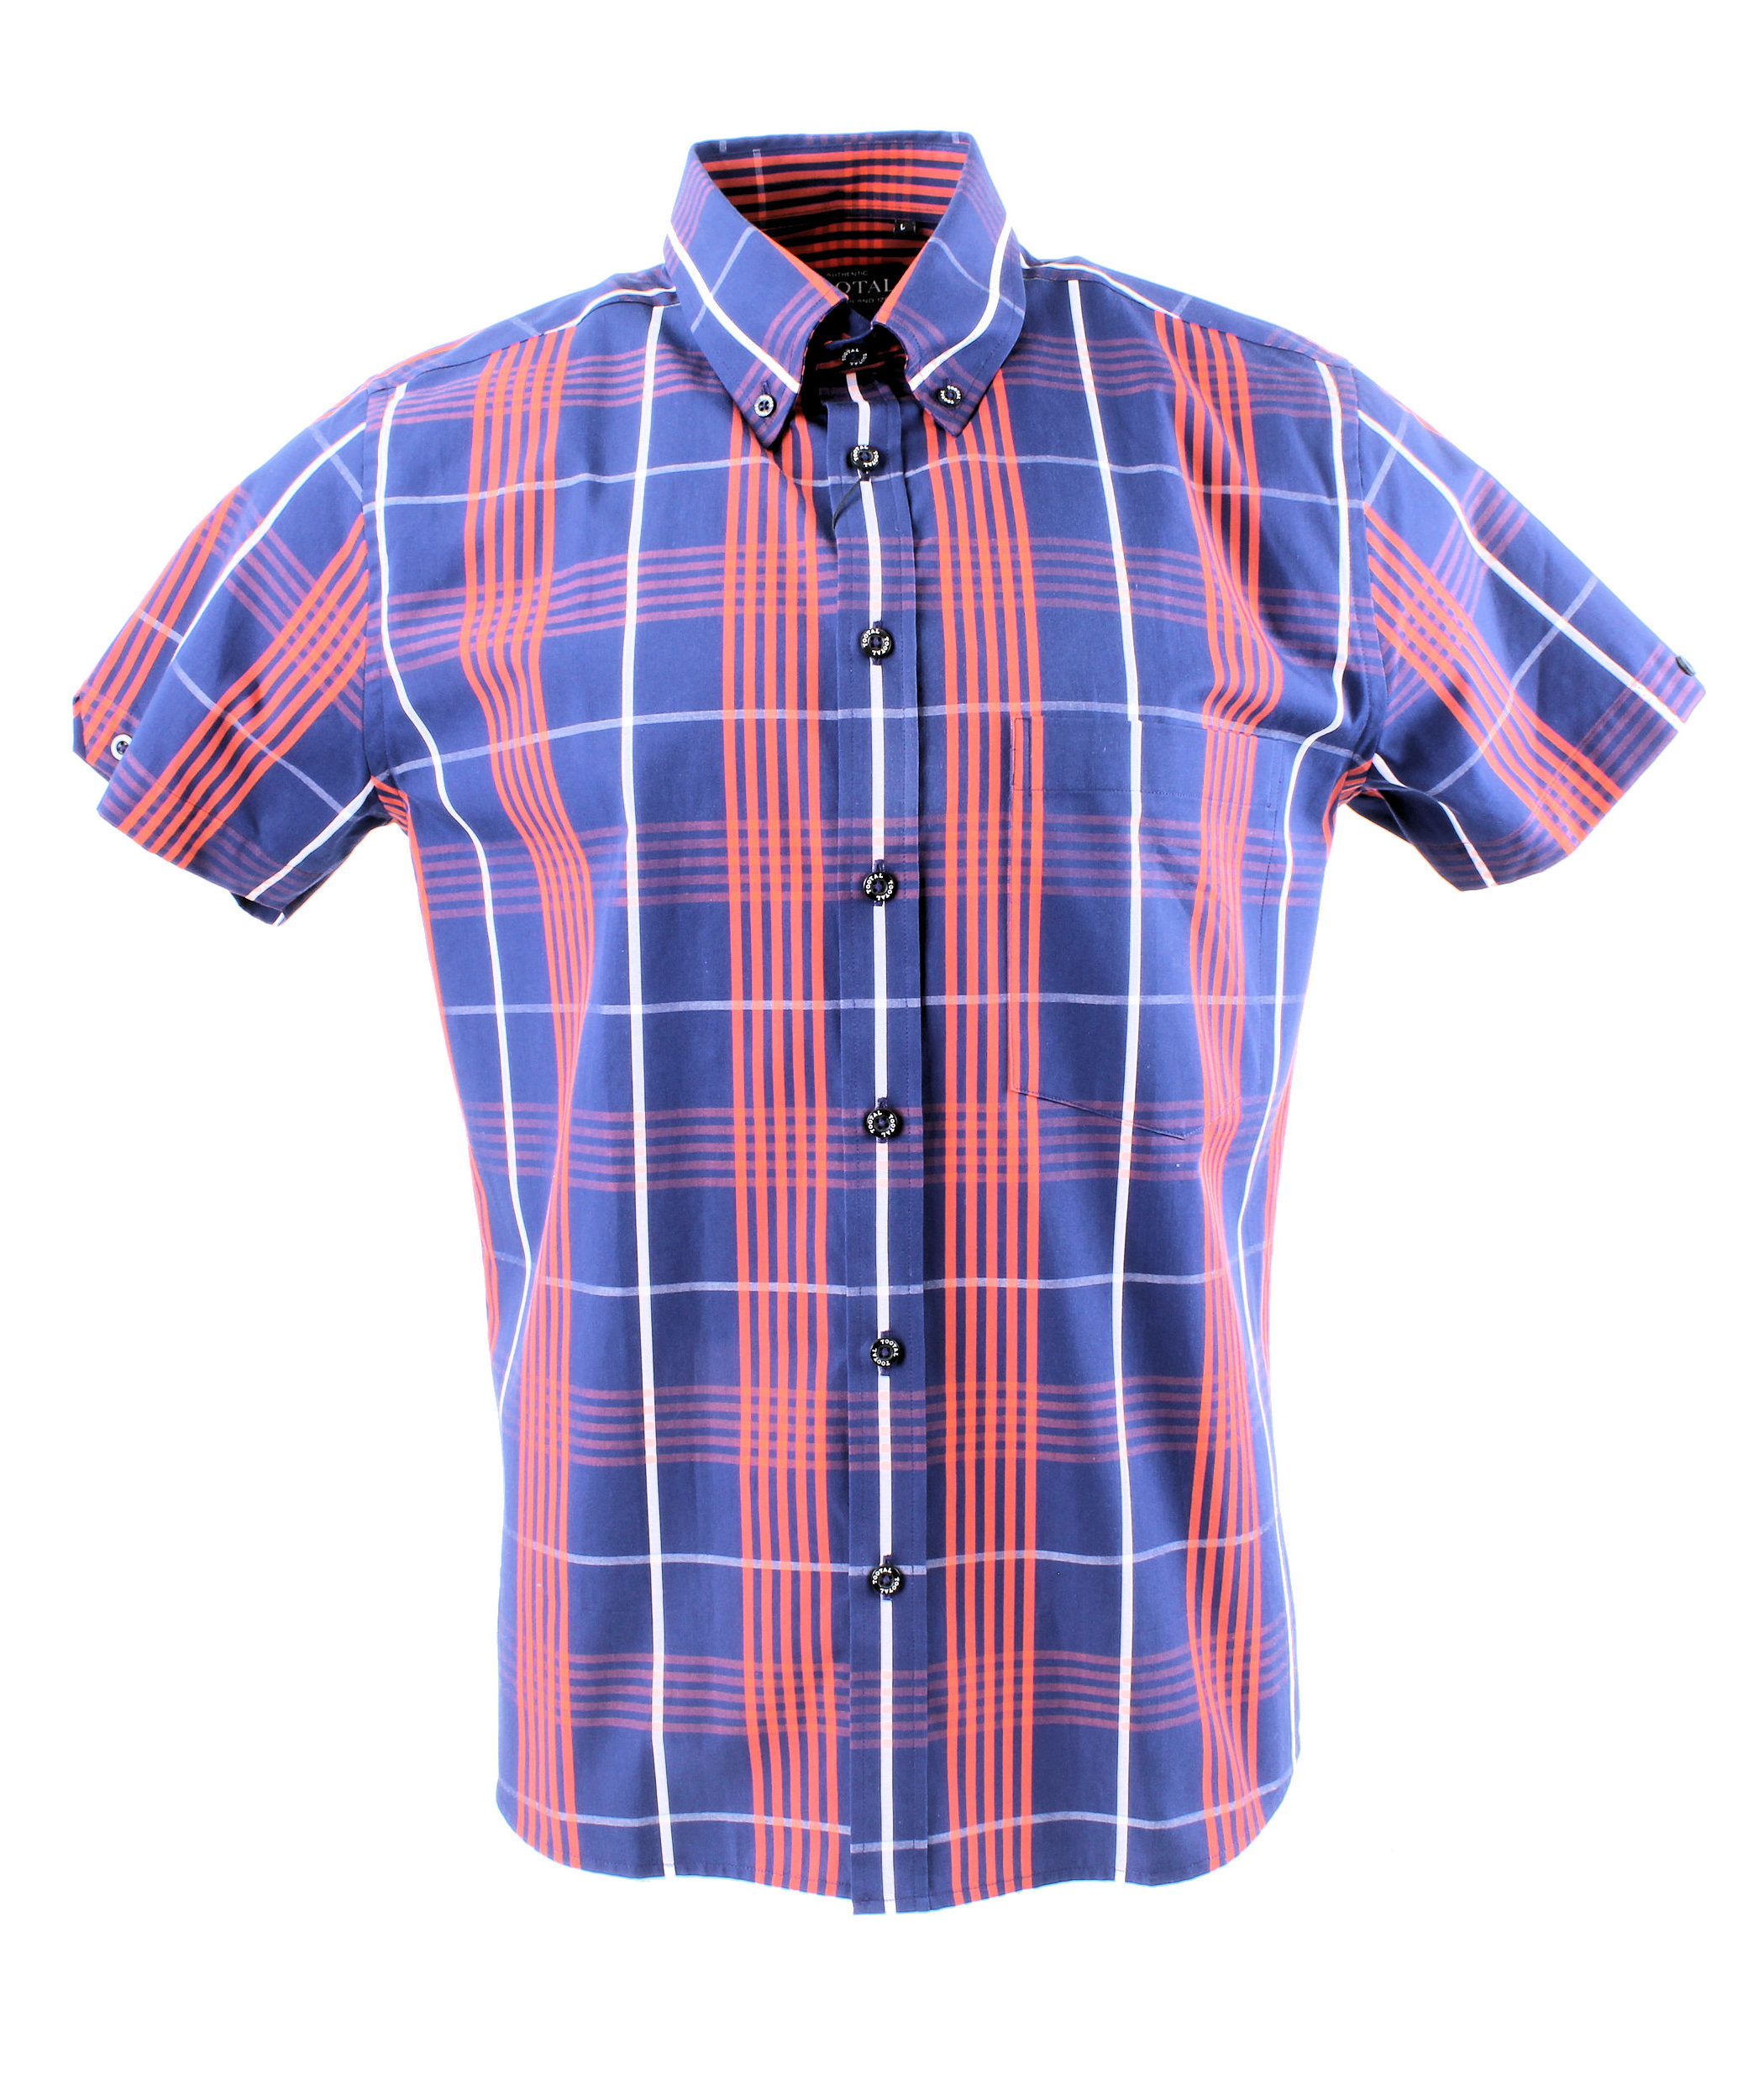 Tootal Slim Fit Navy Blue & Orange Check Cotton Shirt | Tootal